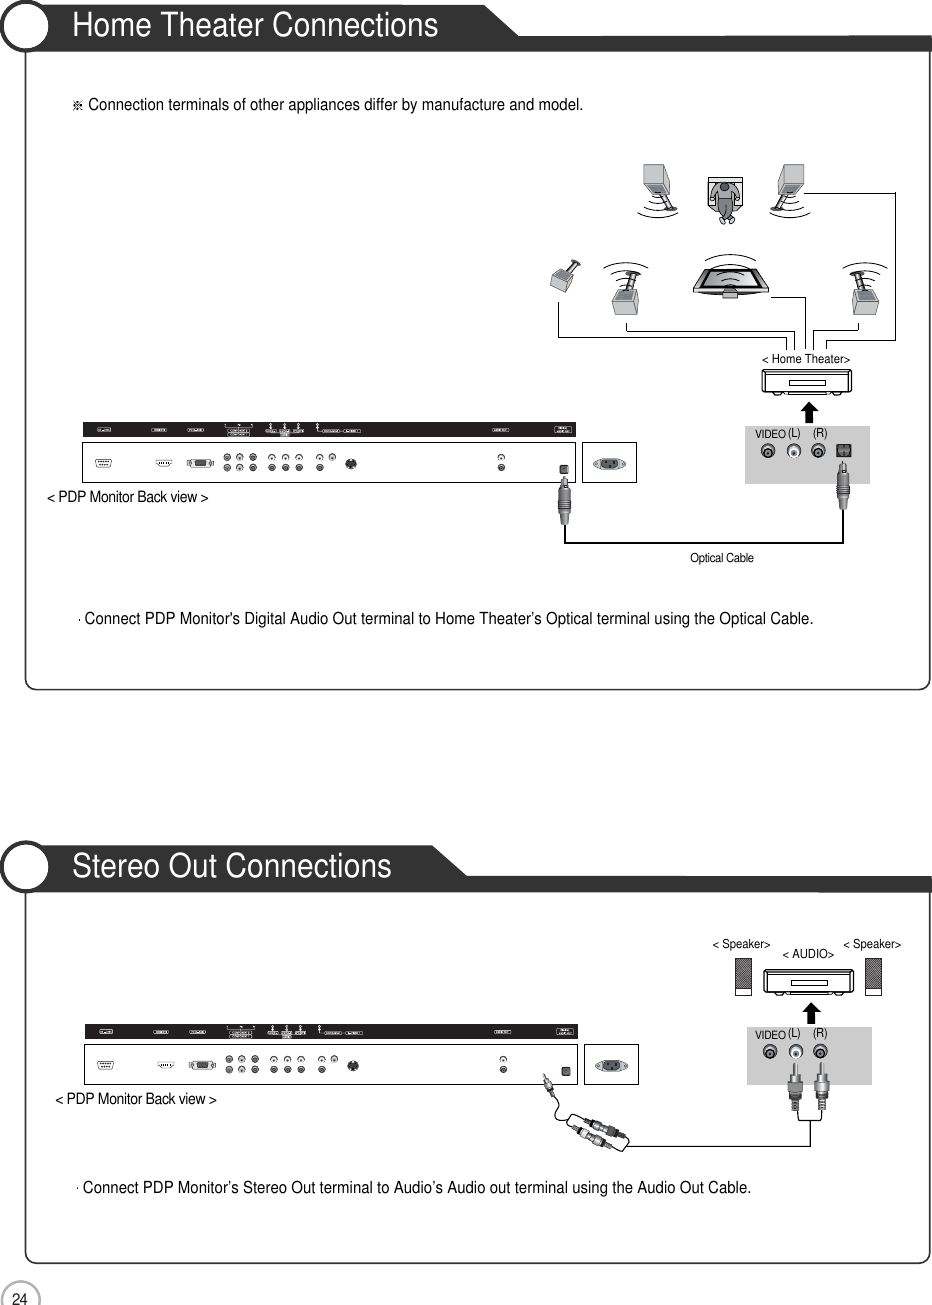 24ConnectionHome Theater ConnectionsStereo Out Connections&lt; PDP Monitor Back view &gt;Connect PDP Monitor&apos;s Digital Audio Out terminal to Home Theater’s Optical terminal using the Optical Cable.Connect PDP Monitor’s Stereo Out terminal to Audio’s Audio out terminal using the Audio Out Cable.Connection terminals of other appliances differ by manufacture and model.(R)VIDEO (L)&lt; Home Theater&gt;(R)VIDEO (L)&lt; AUDIO&gt;&lt; Speaker&gt; &lt; Speaker&gt;&lt; PDP Monitor Back view &gt;Optical Cable